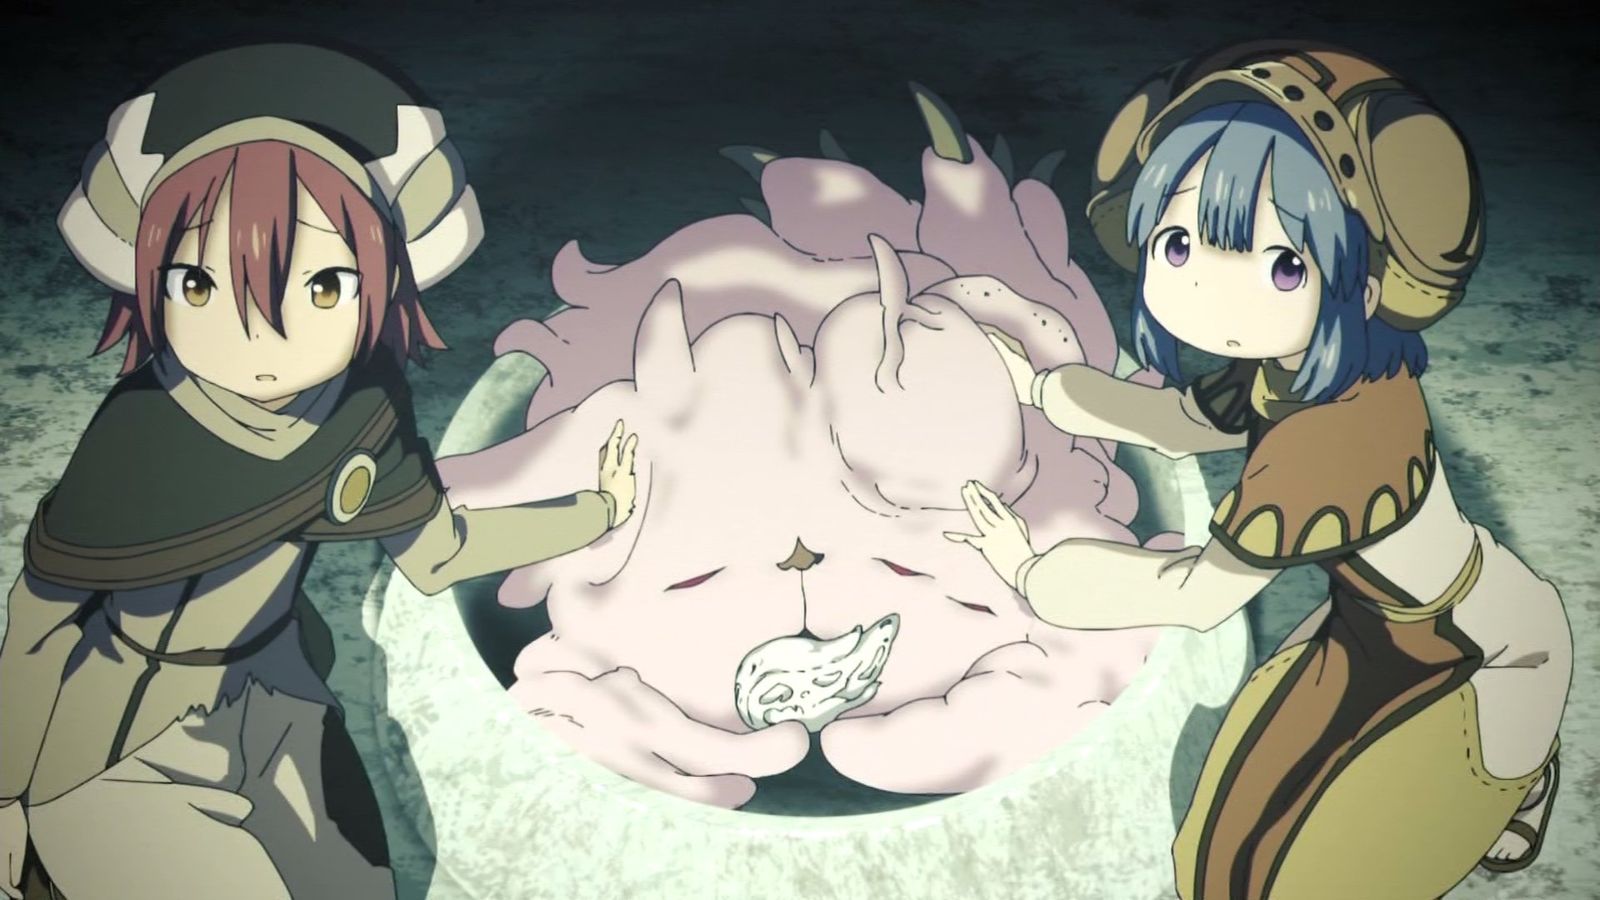 Where to Watch and Stream Made in Abyss Season 2 Episode 2 with English Subtitles?